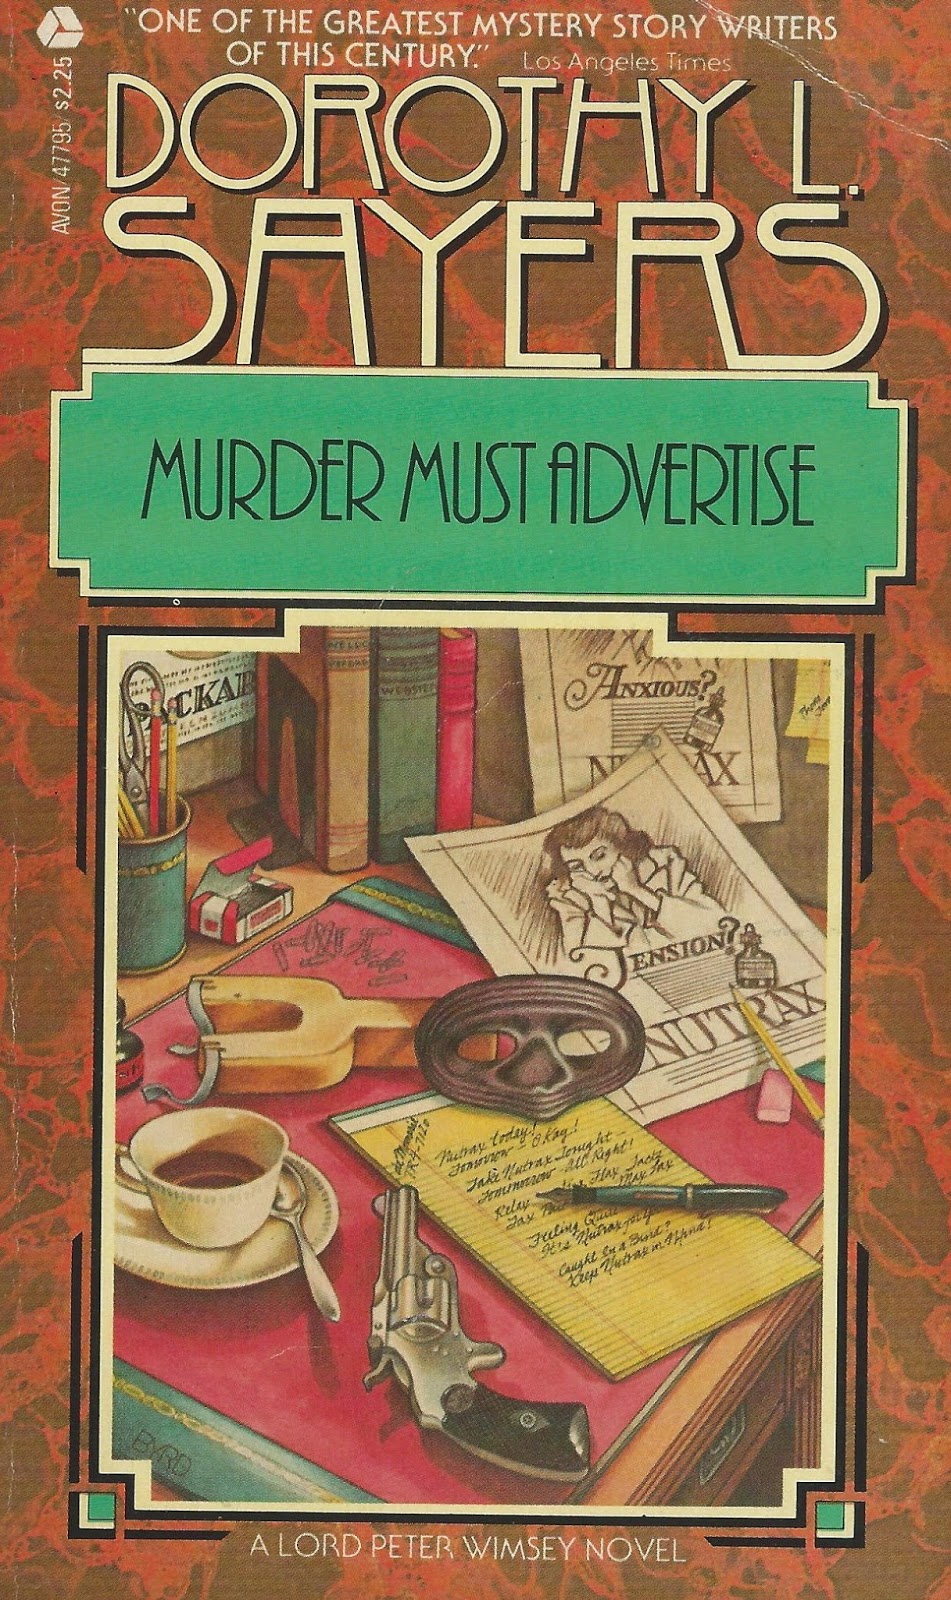 dorothy sayers mysteries in order